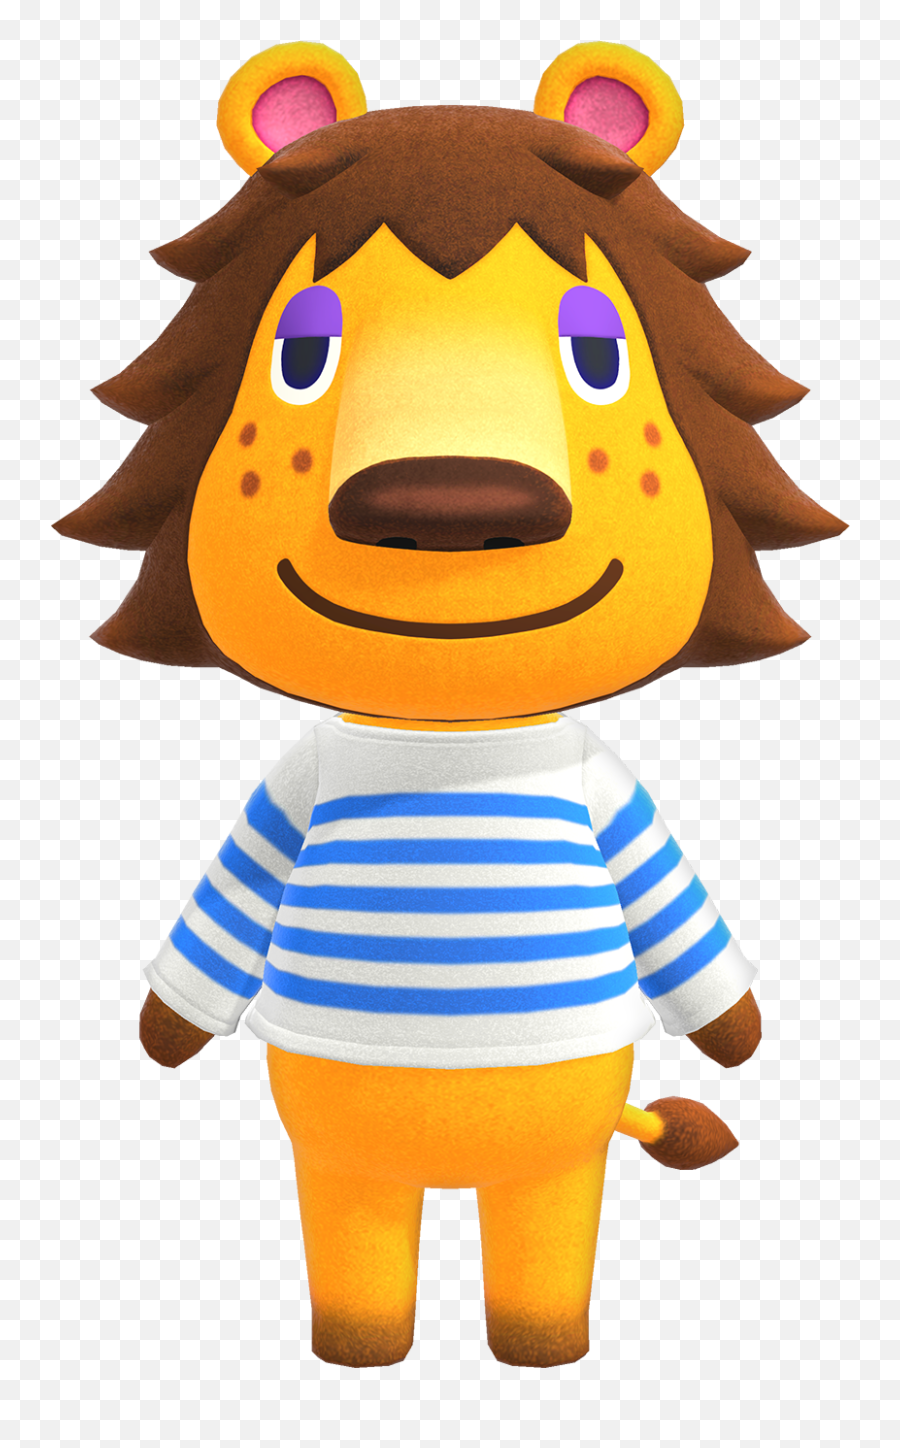 Rex - Rex Animal Crossing New Horizons Emoji,Little Yellow Maple Leaf Meaning In Emotions